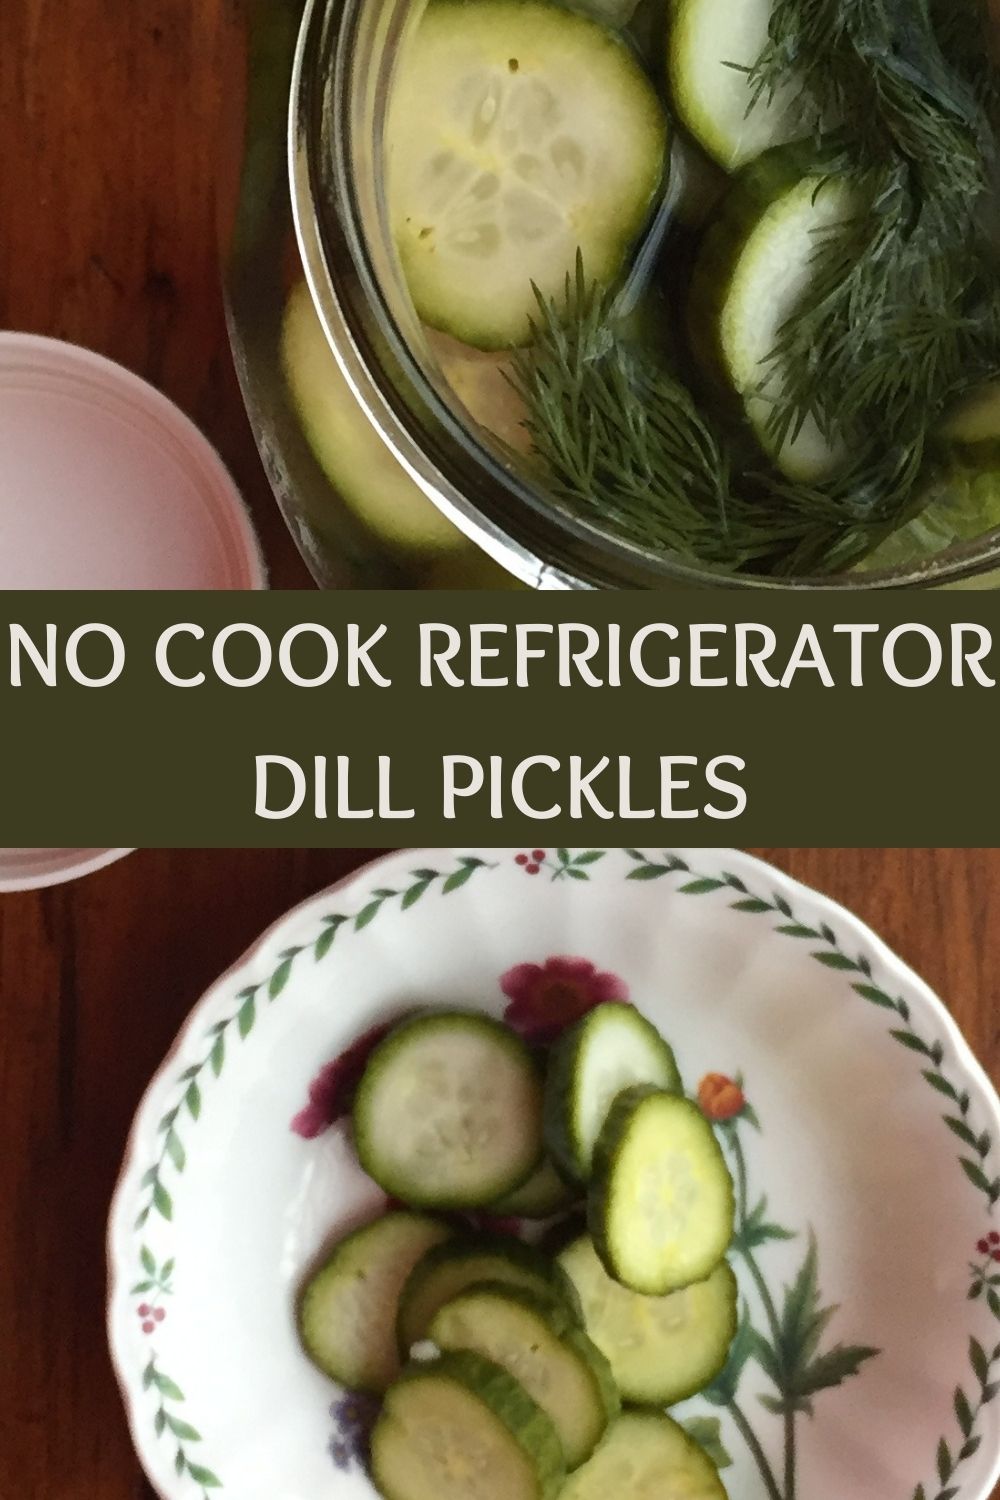 No cook refrigerator dill pickles